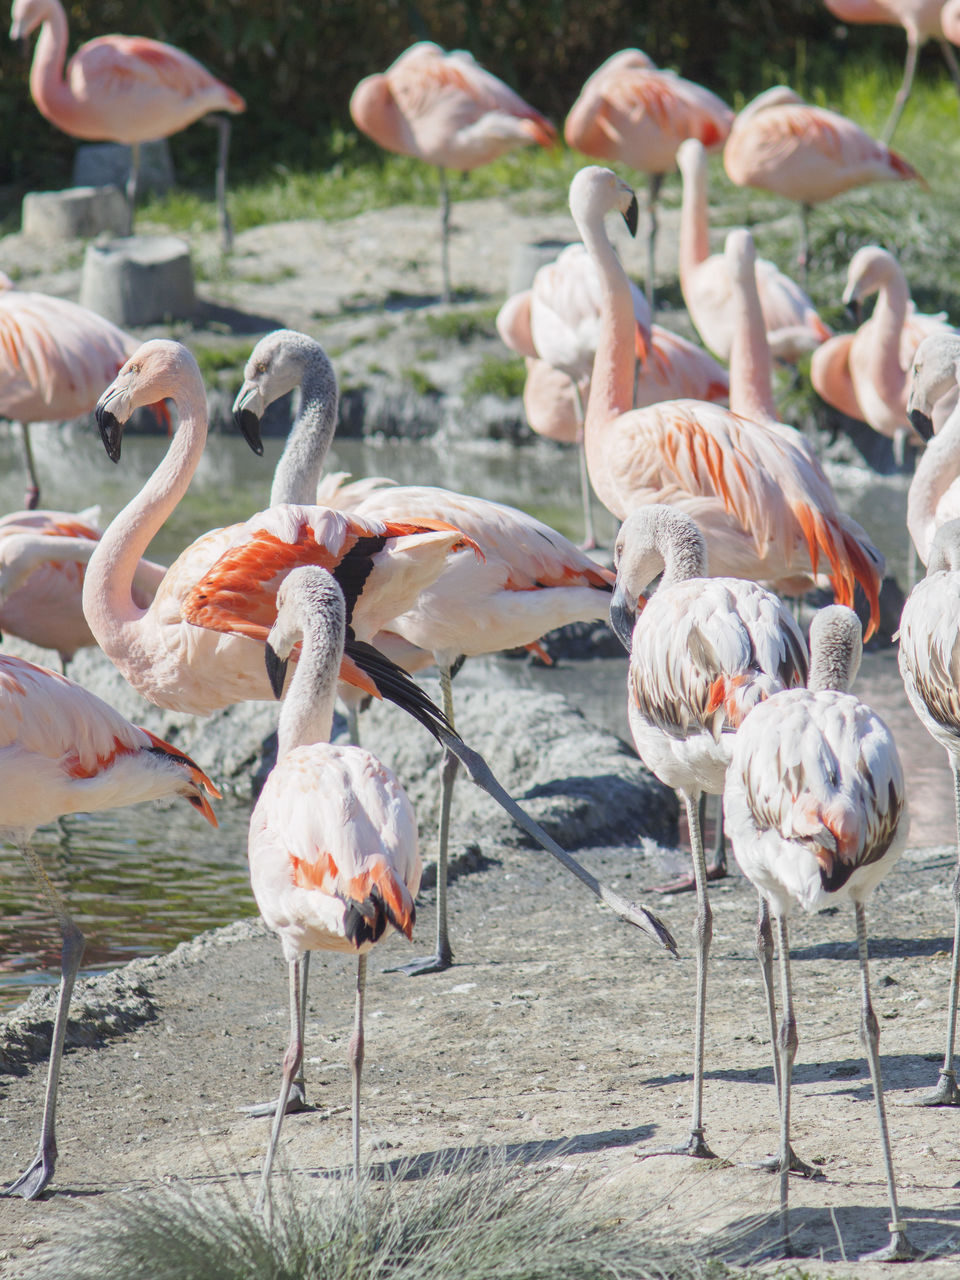 bird, animal themes, animals in the wild, large group of animals, day, animal wildlife, water, nature, no people, flamingo, outdoors